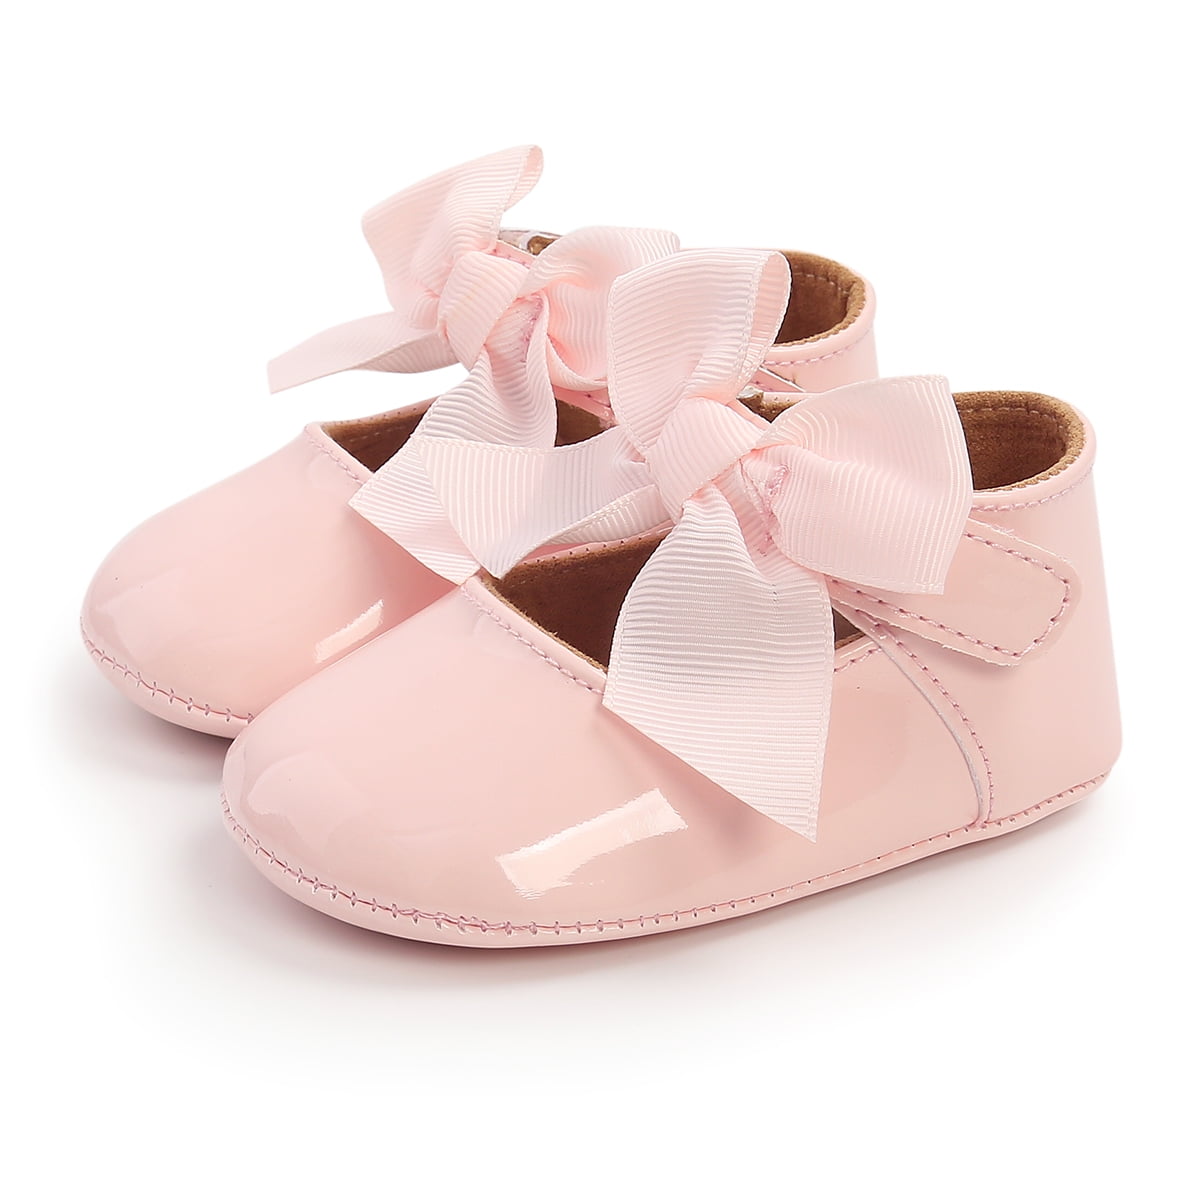 NewJourney Baby Girl Christening Baptism Shoes PU Leather Princess Soft Sole Loafers 